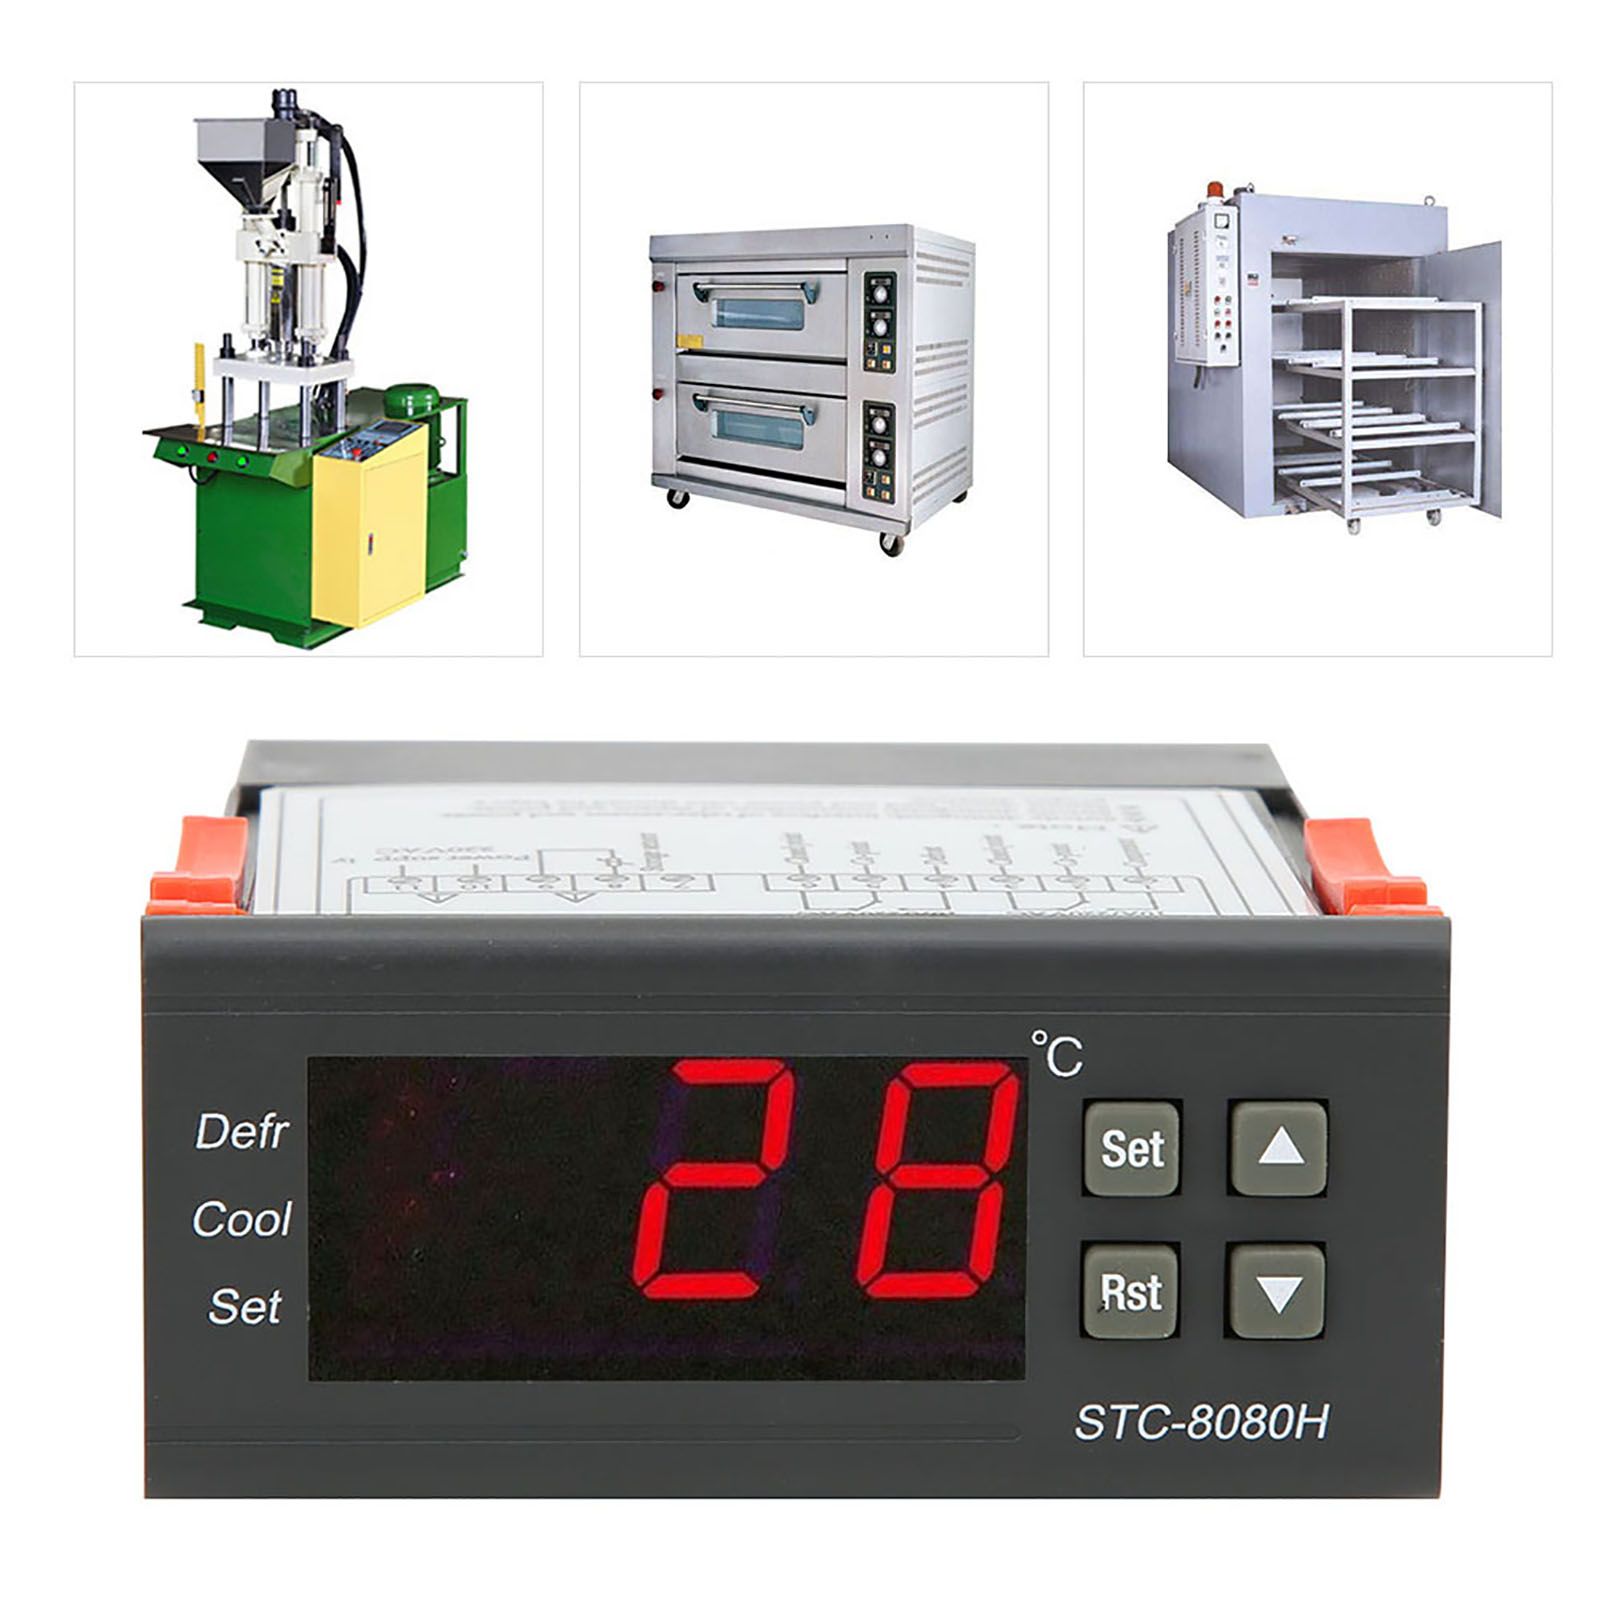 H temp. Equipment measuring the temperature of the Refrigeration System of Refrigeration cars.